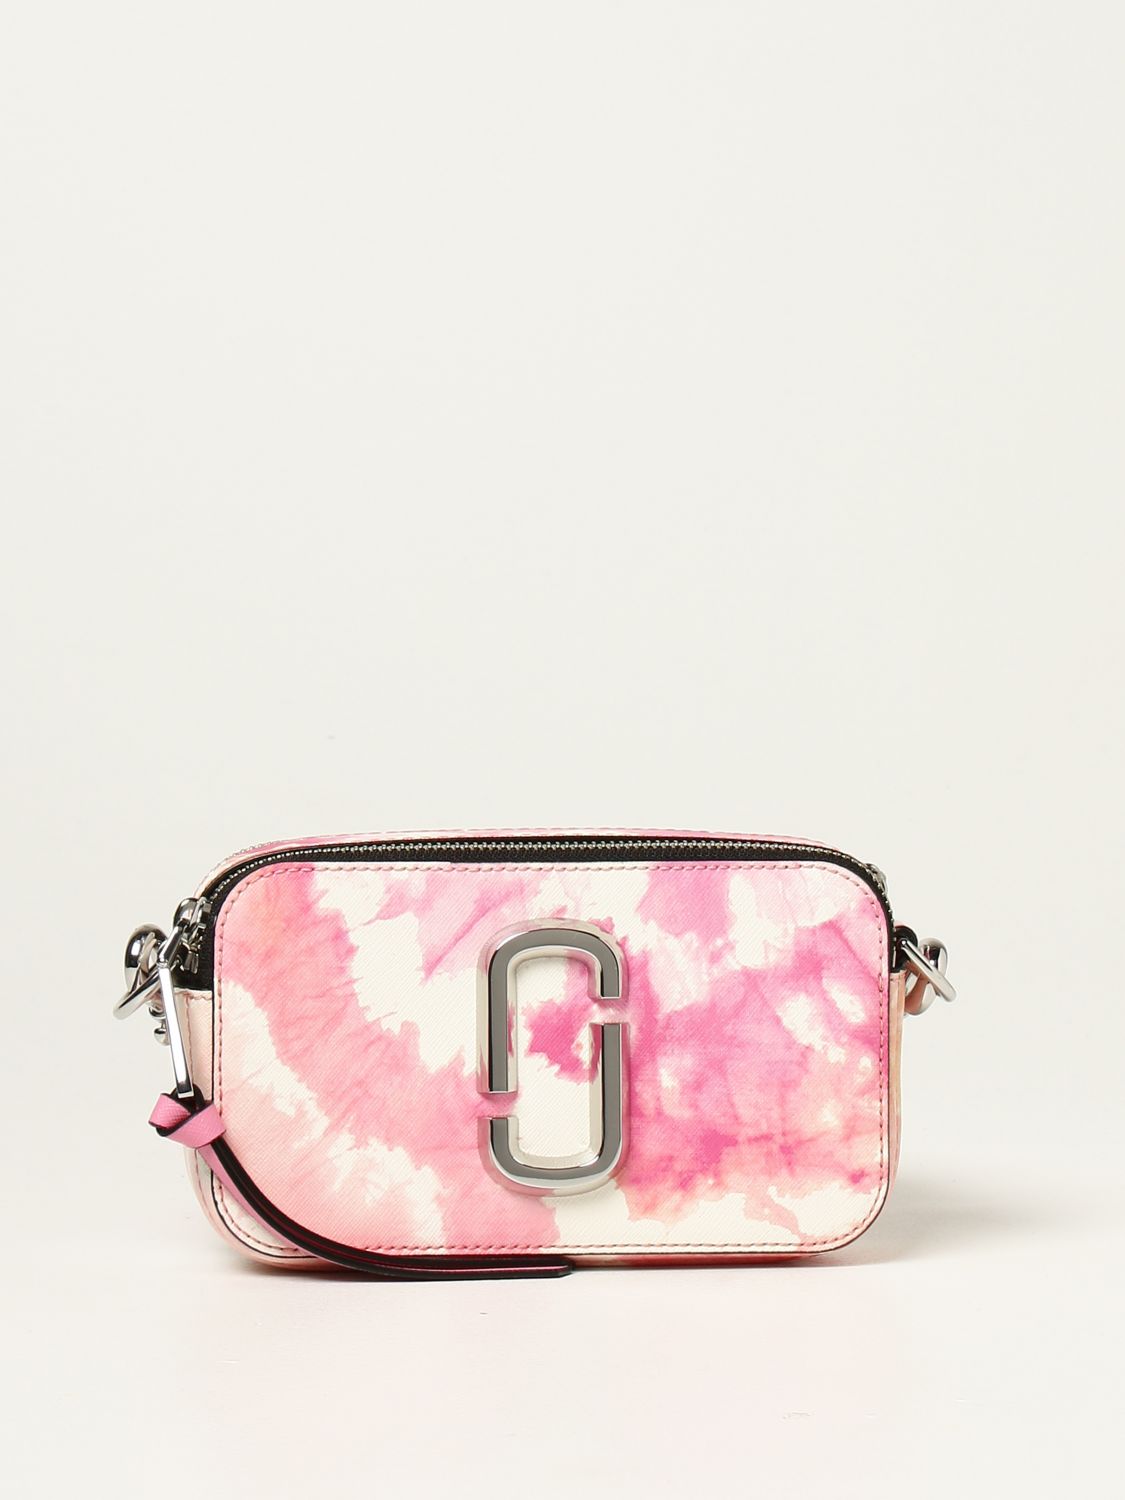 Marc Jacobs, Bags, Marc Jacobs Snapshot Bag With Pink Strap